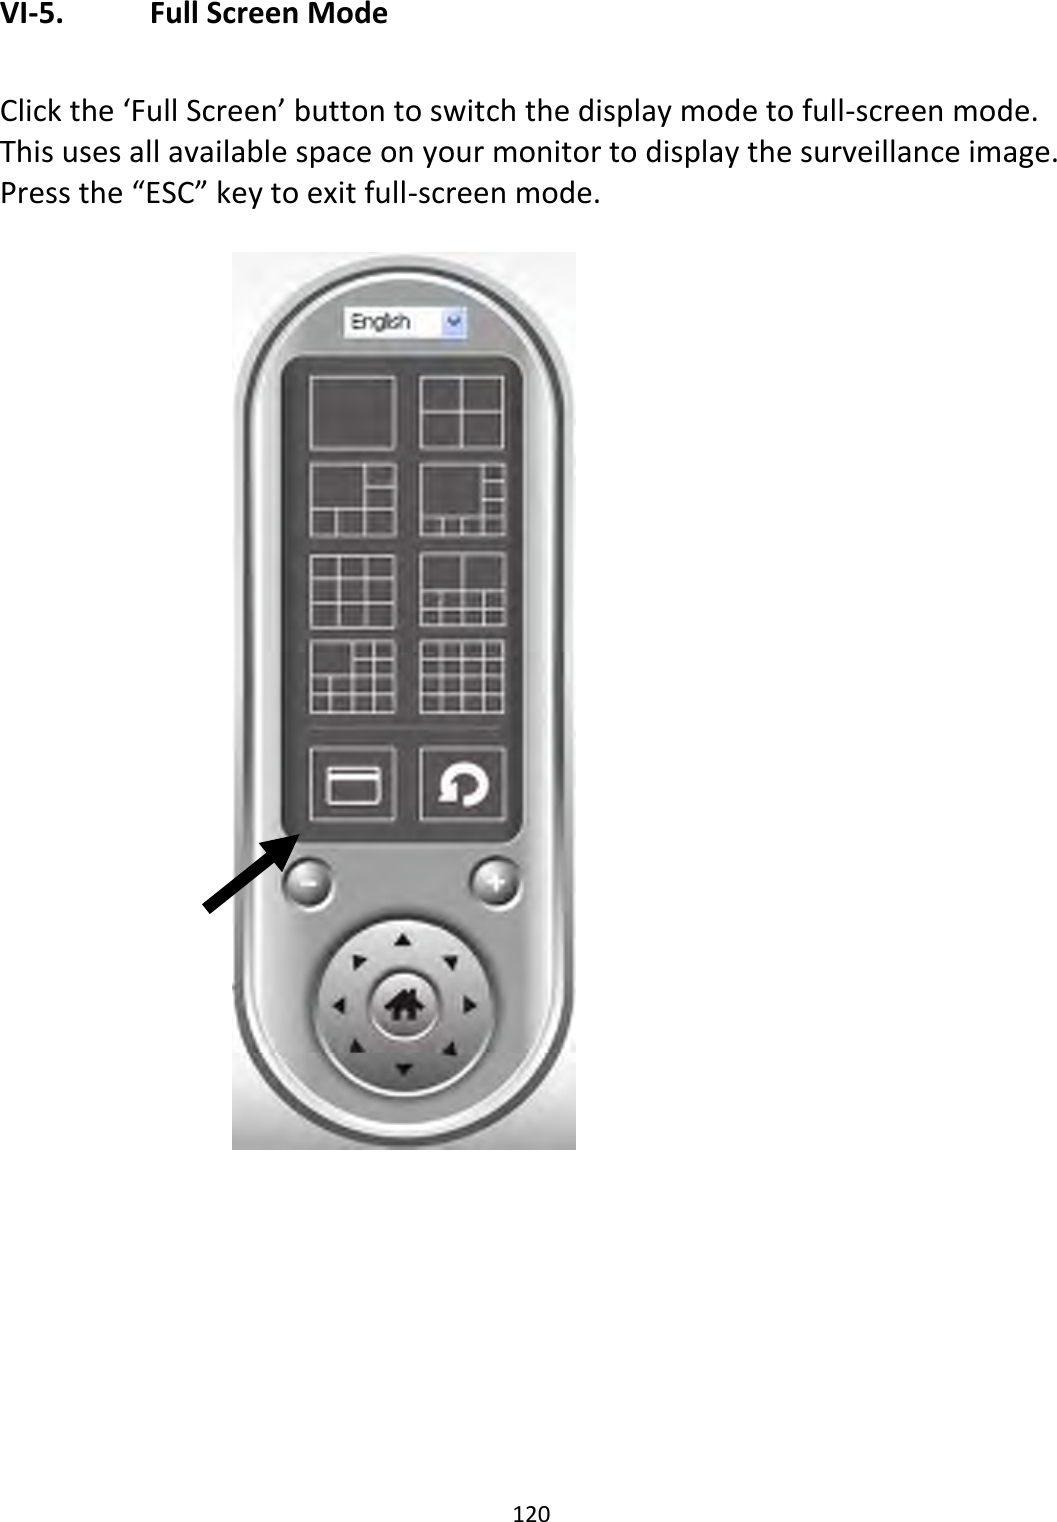 120  VI-5.   Full Screen Mode  Click the ‘Full Screen’ button to switch the display mode to full-screen mode. This uses all available space on your monitor to display the surveillance image. Press the “ESC” key to exit full-screen mode.    